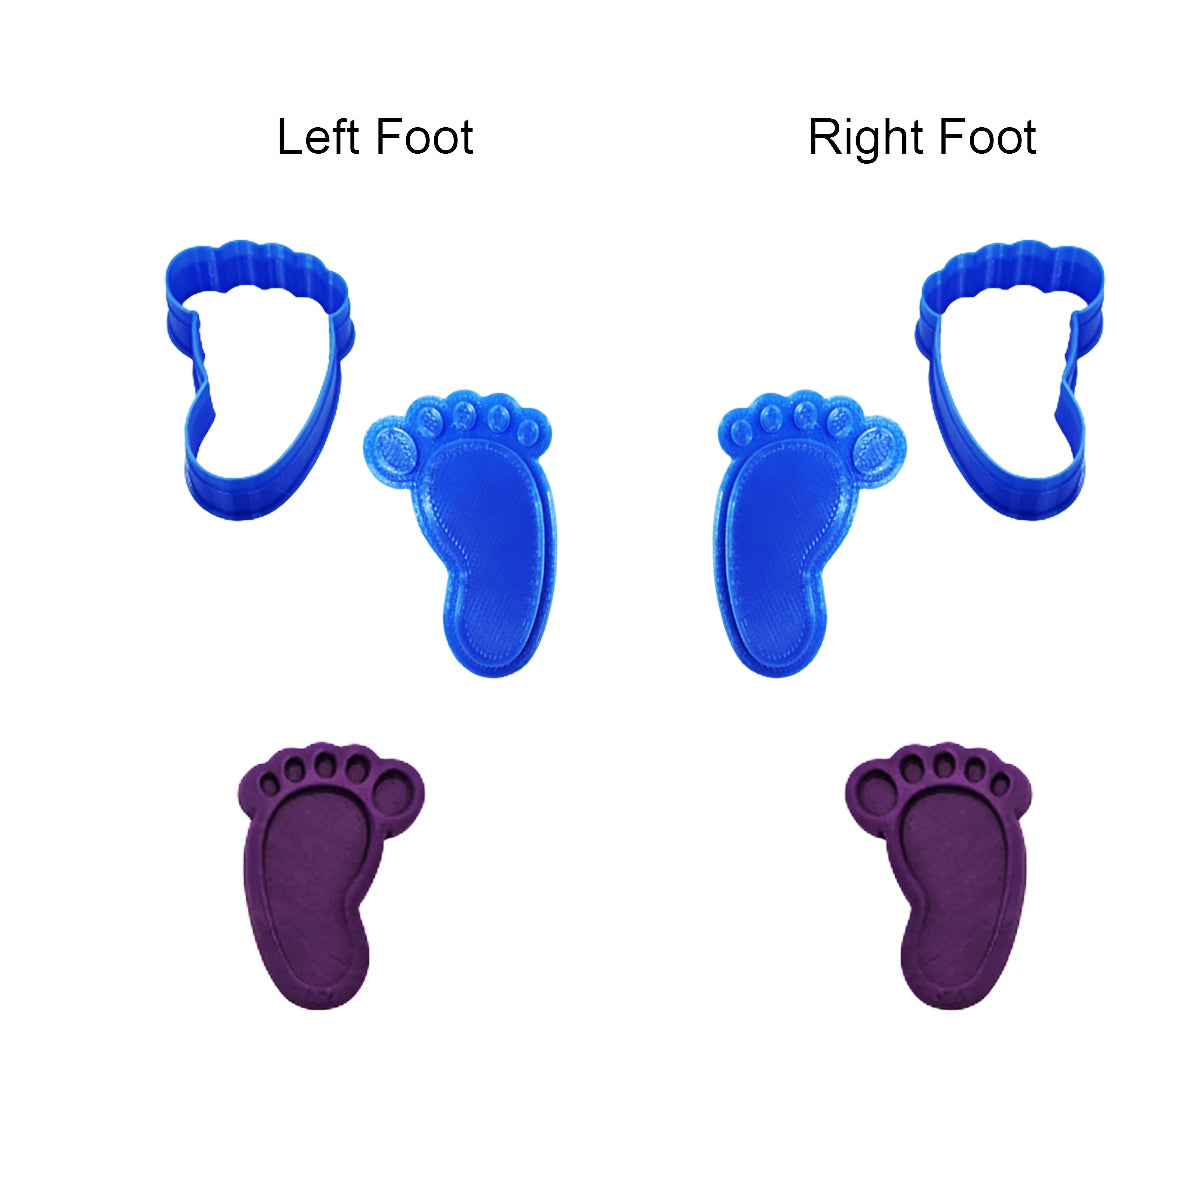 Baby Foot Print Cookie Cutter and Stamp, Left and Right Feet Options